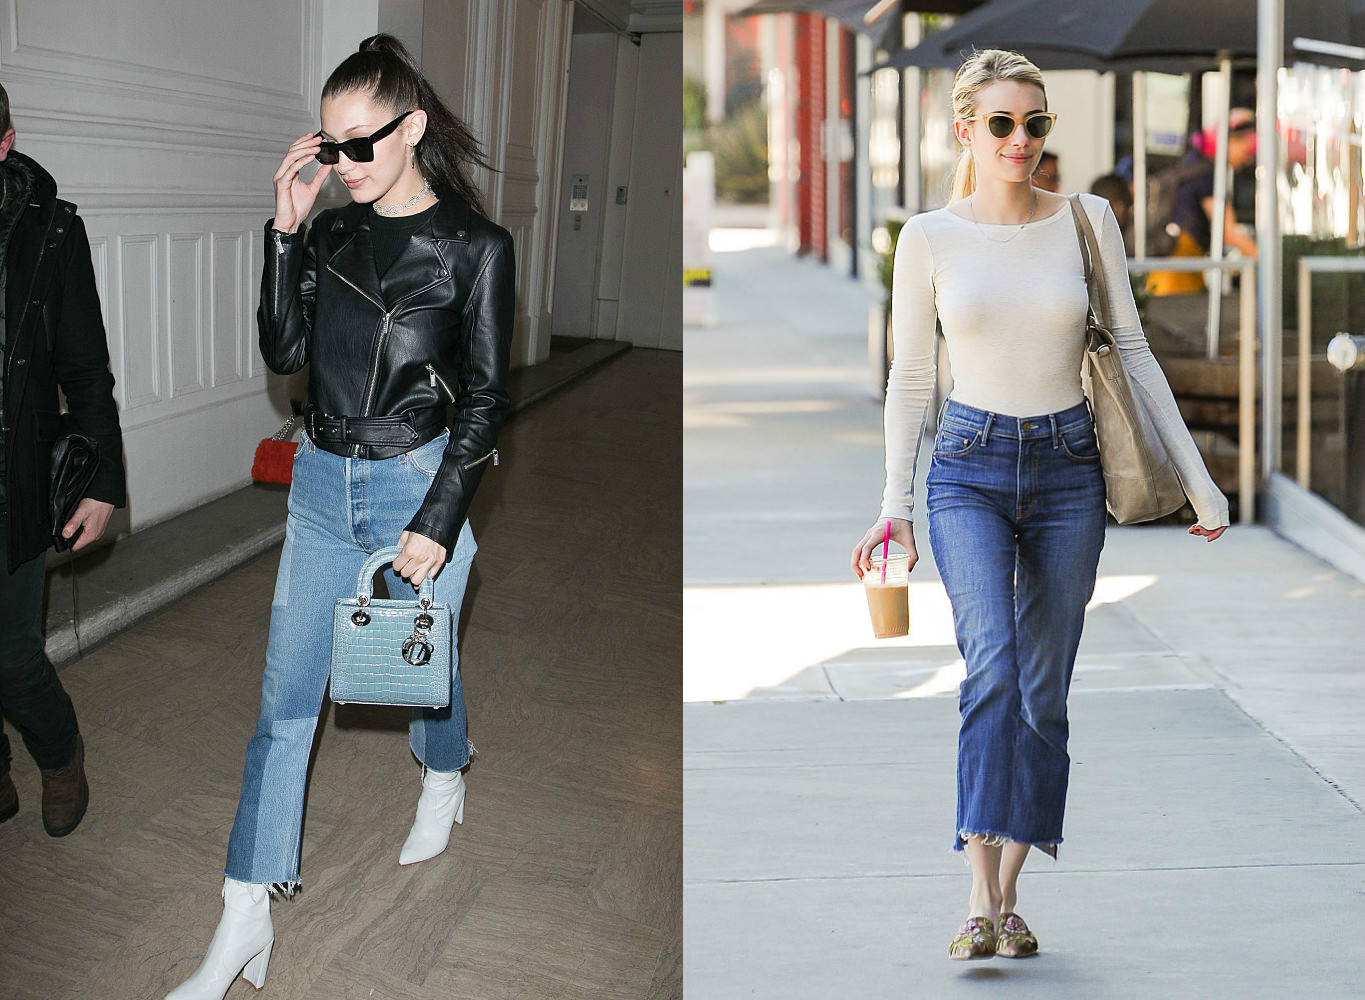 The 6 denim trends you need to try in 2017, because it doesn't